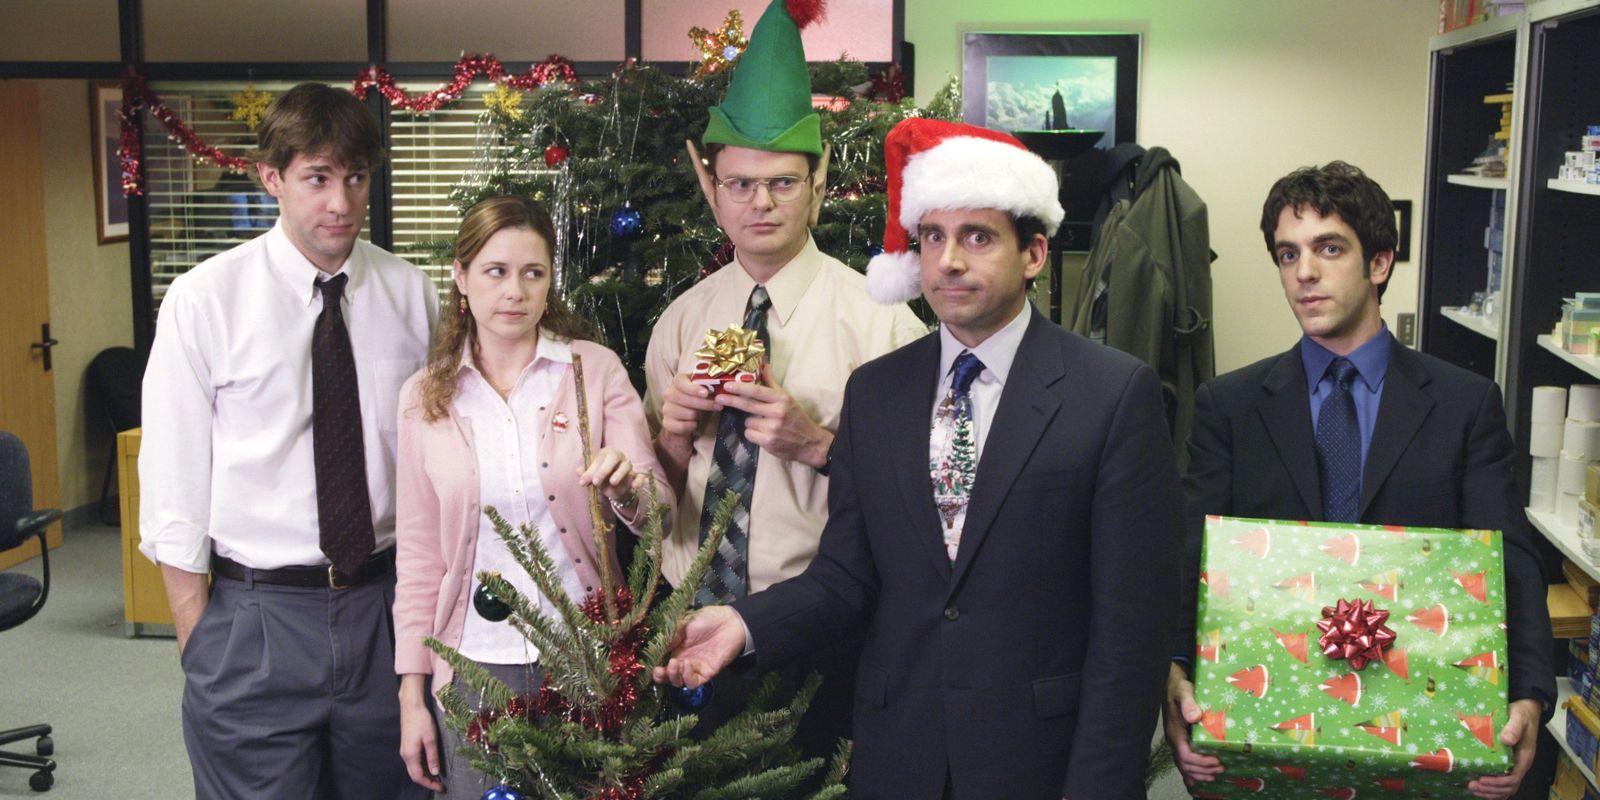 The Office Christmas Episode Yankee Swap Rules Explained